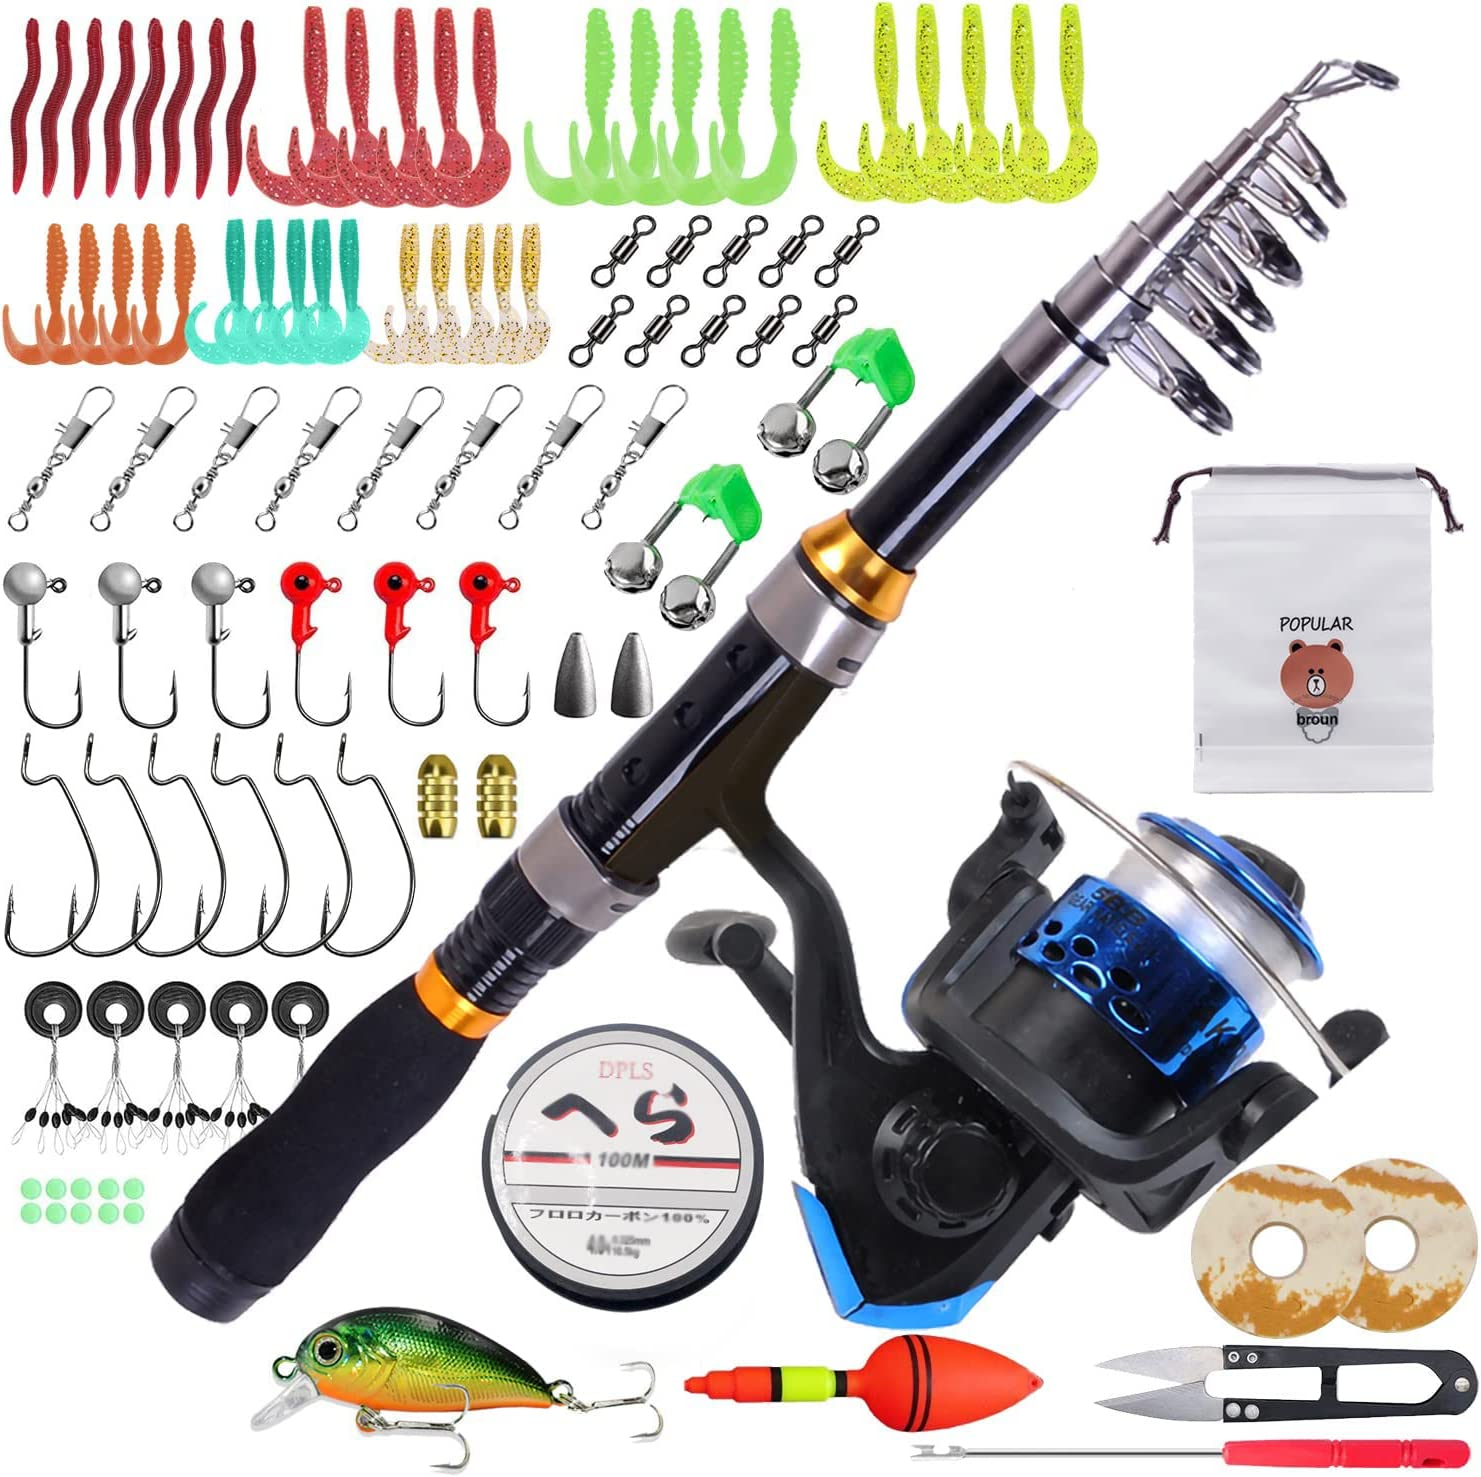 MECOS Telescopic Fishing Rod Set, Beginner Adults Carbon Fiber Telescopic Fishing  Pole and Reel Combo with Spinning Reel, Line, Lure, Hooks and Carrier Bag,  Fishing Gear Set for Beginner Adults and Kids